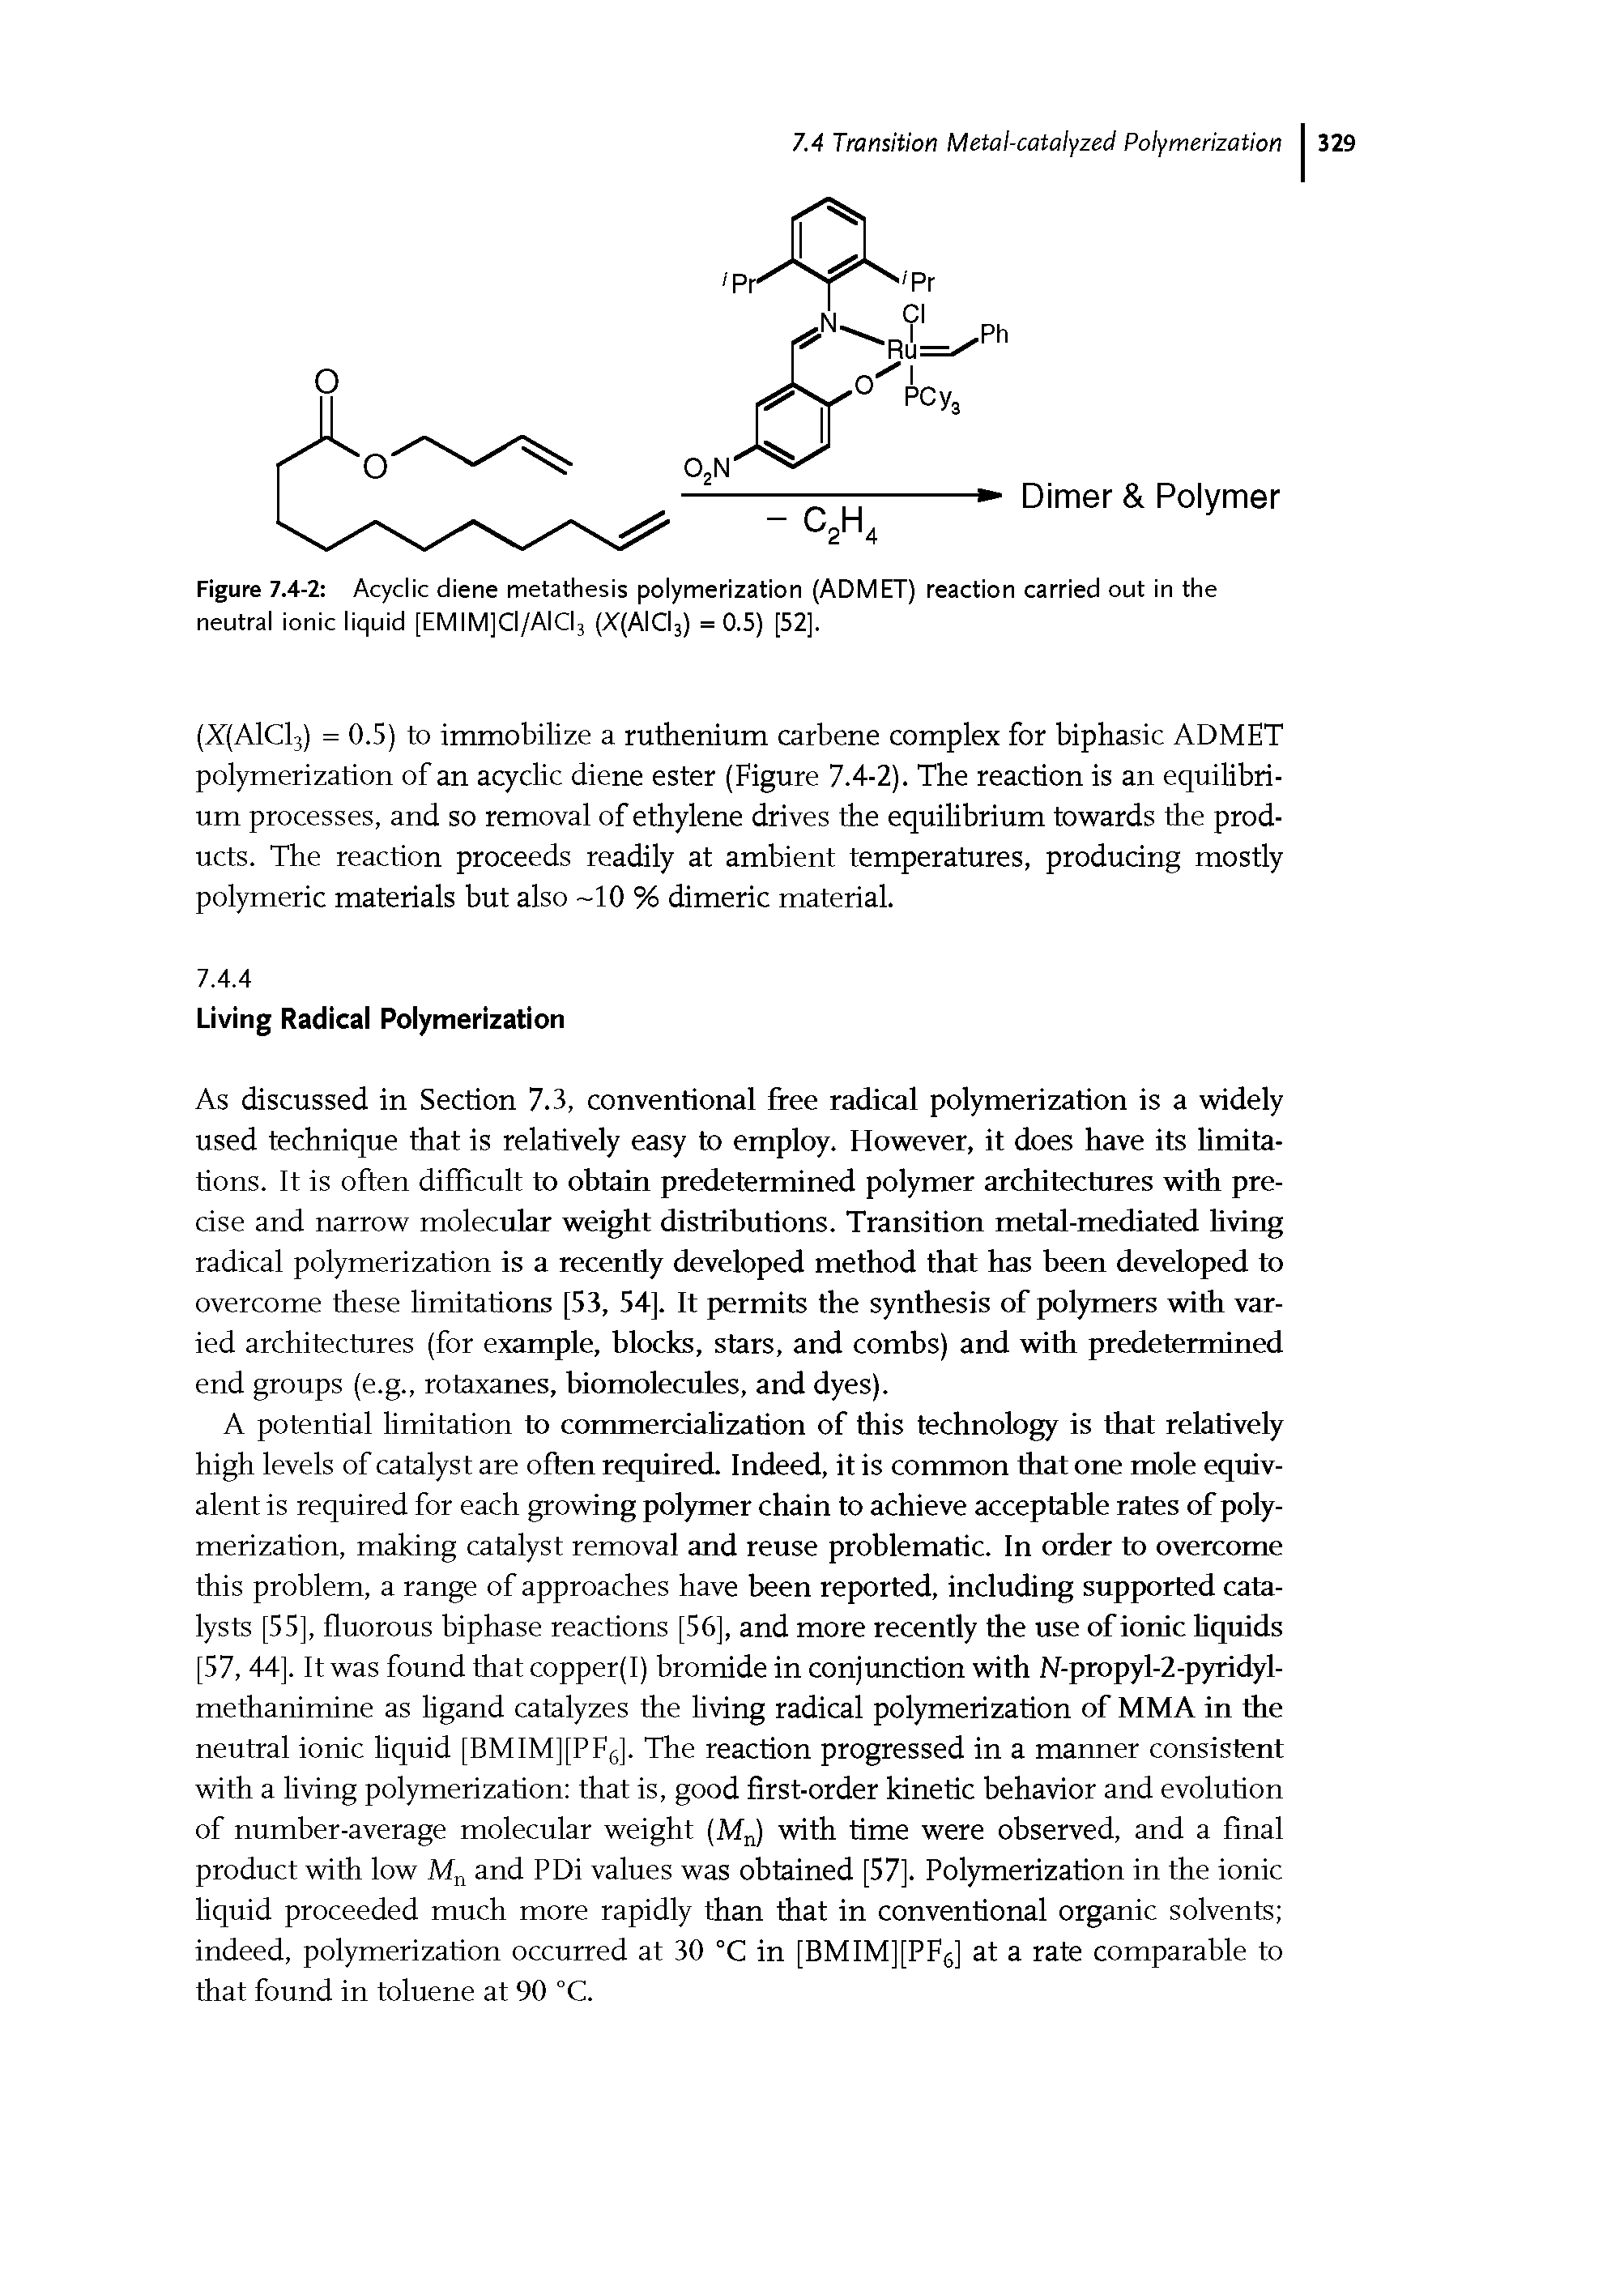 Figure 7.4-2 Acyclic diene metathesis polymerization (ADMET) reaction carried out in the neutral ionic liquid [EMIMlCI/AICIj (X(AICl3) = 0.5) [52].